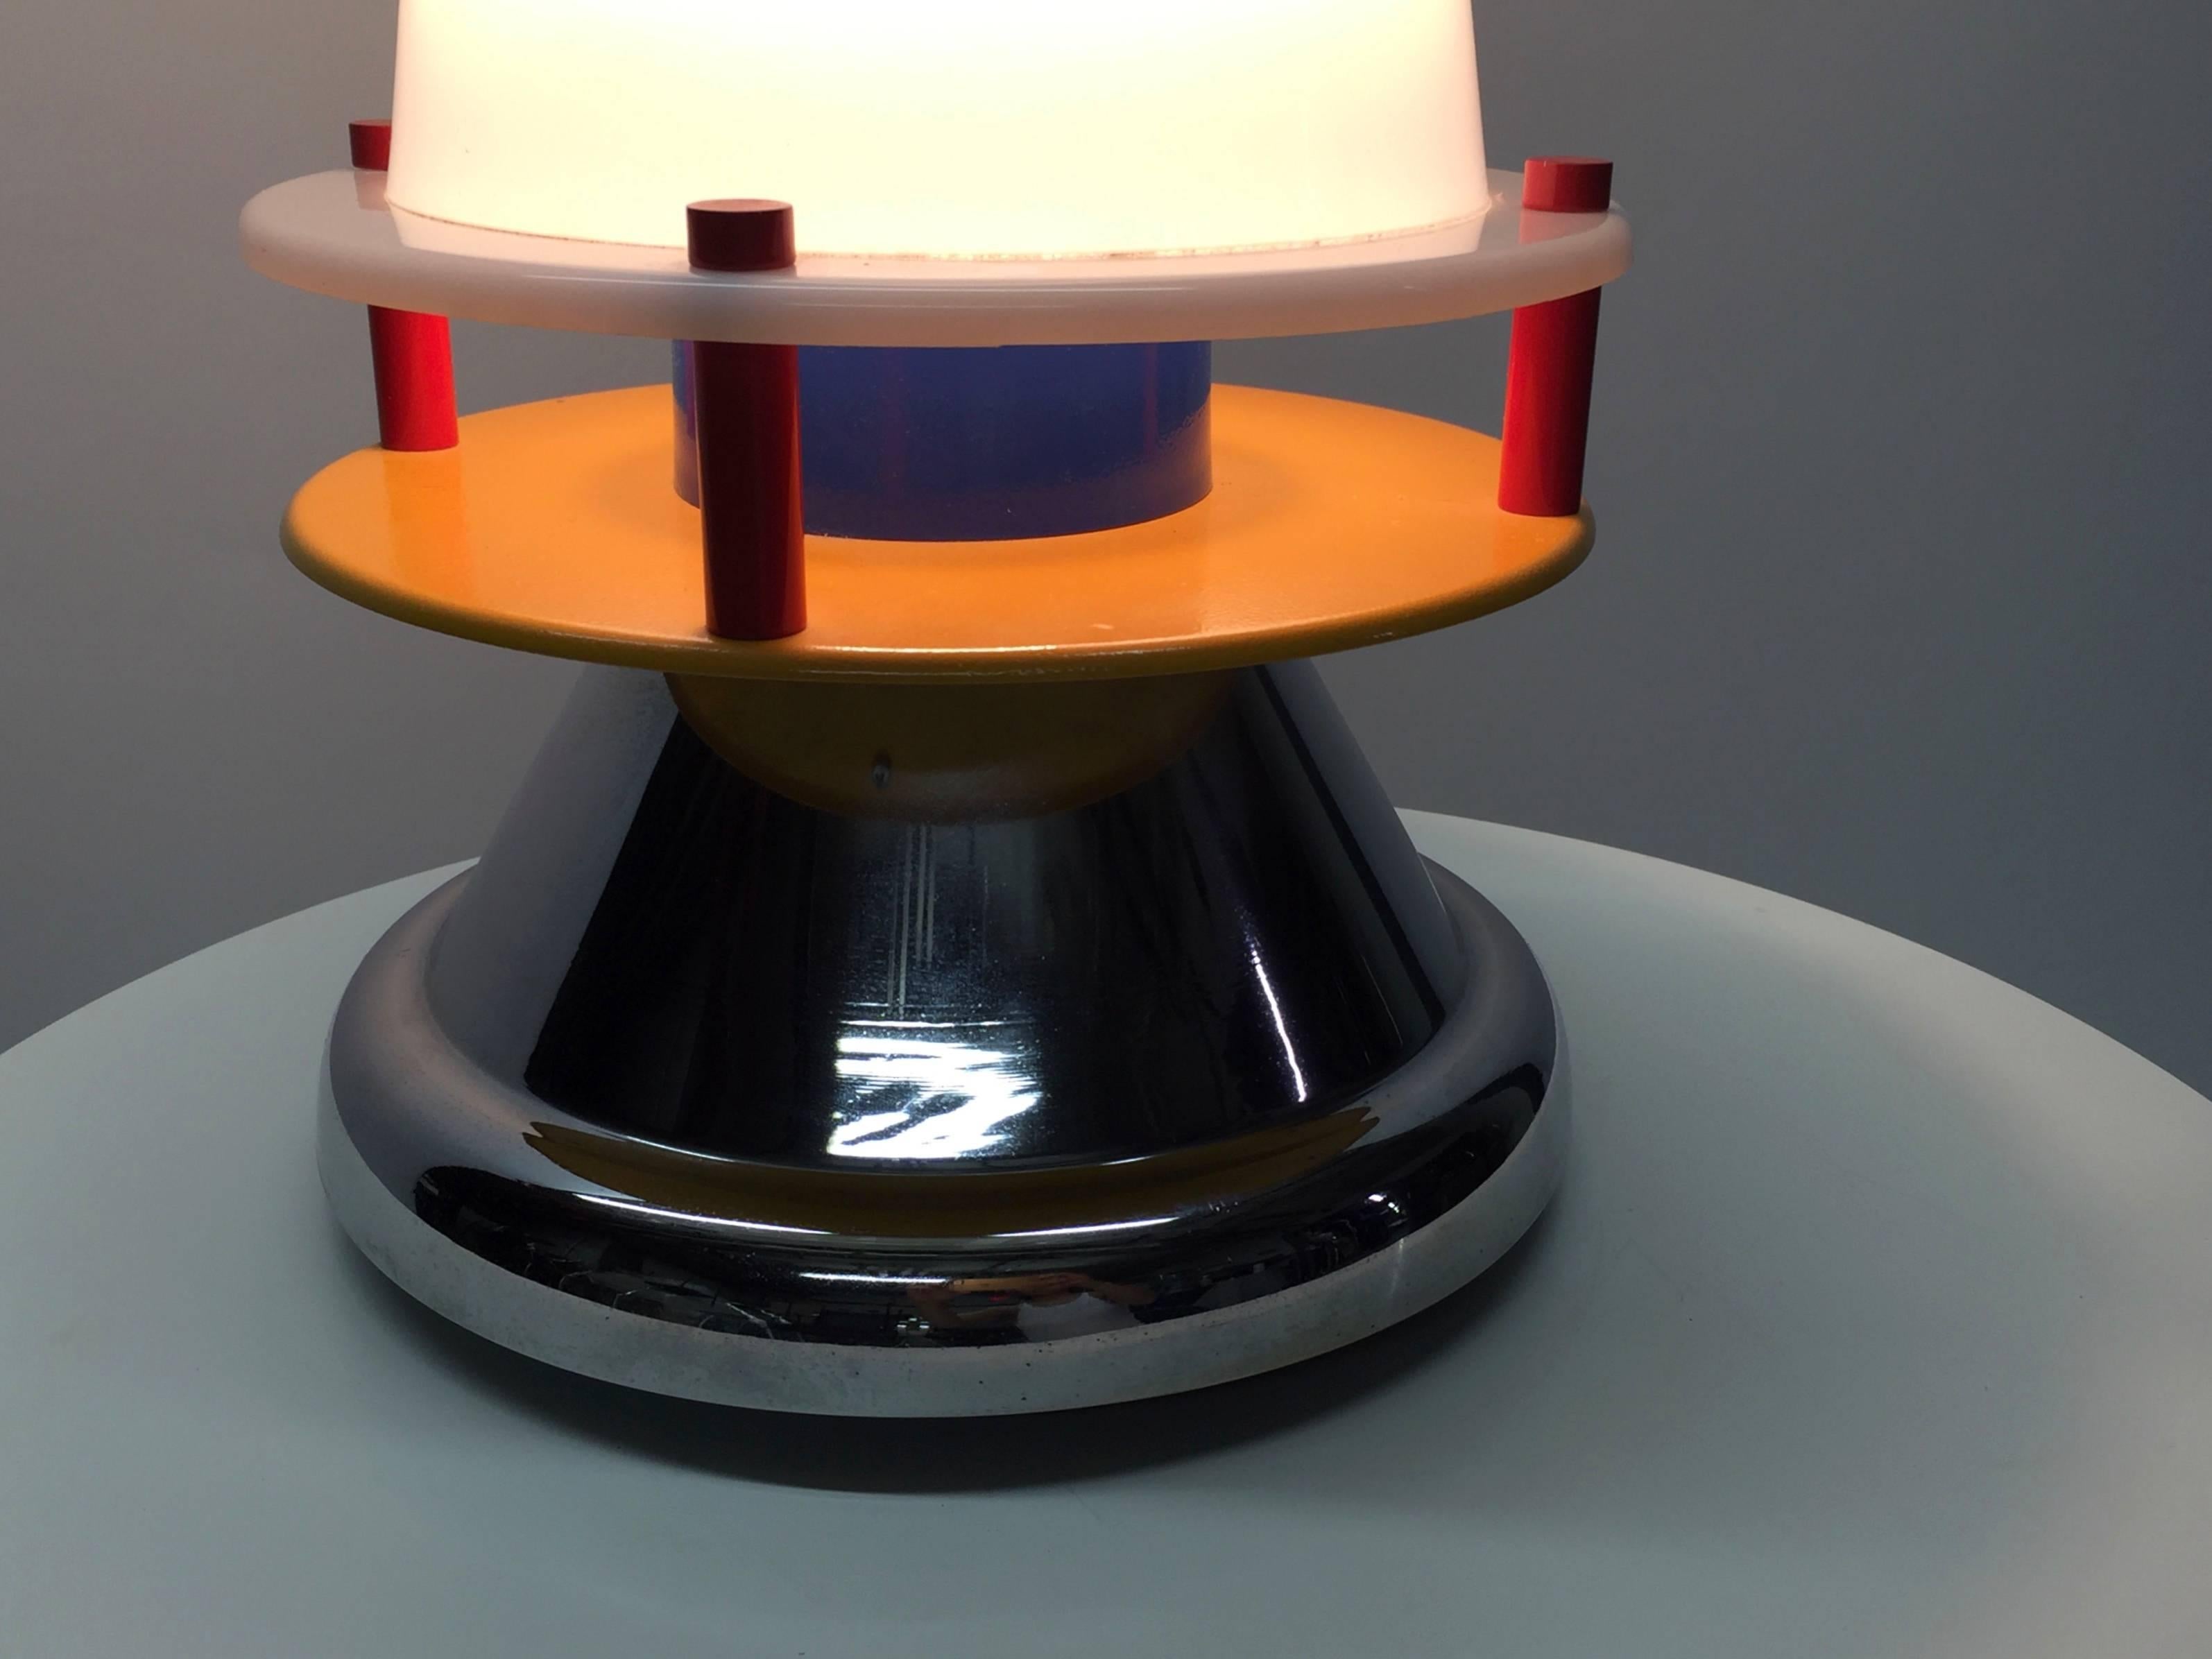 Late 20th Century Table Lamp by Nathalie du Pasquier for Memphis 1986 Made in Italy